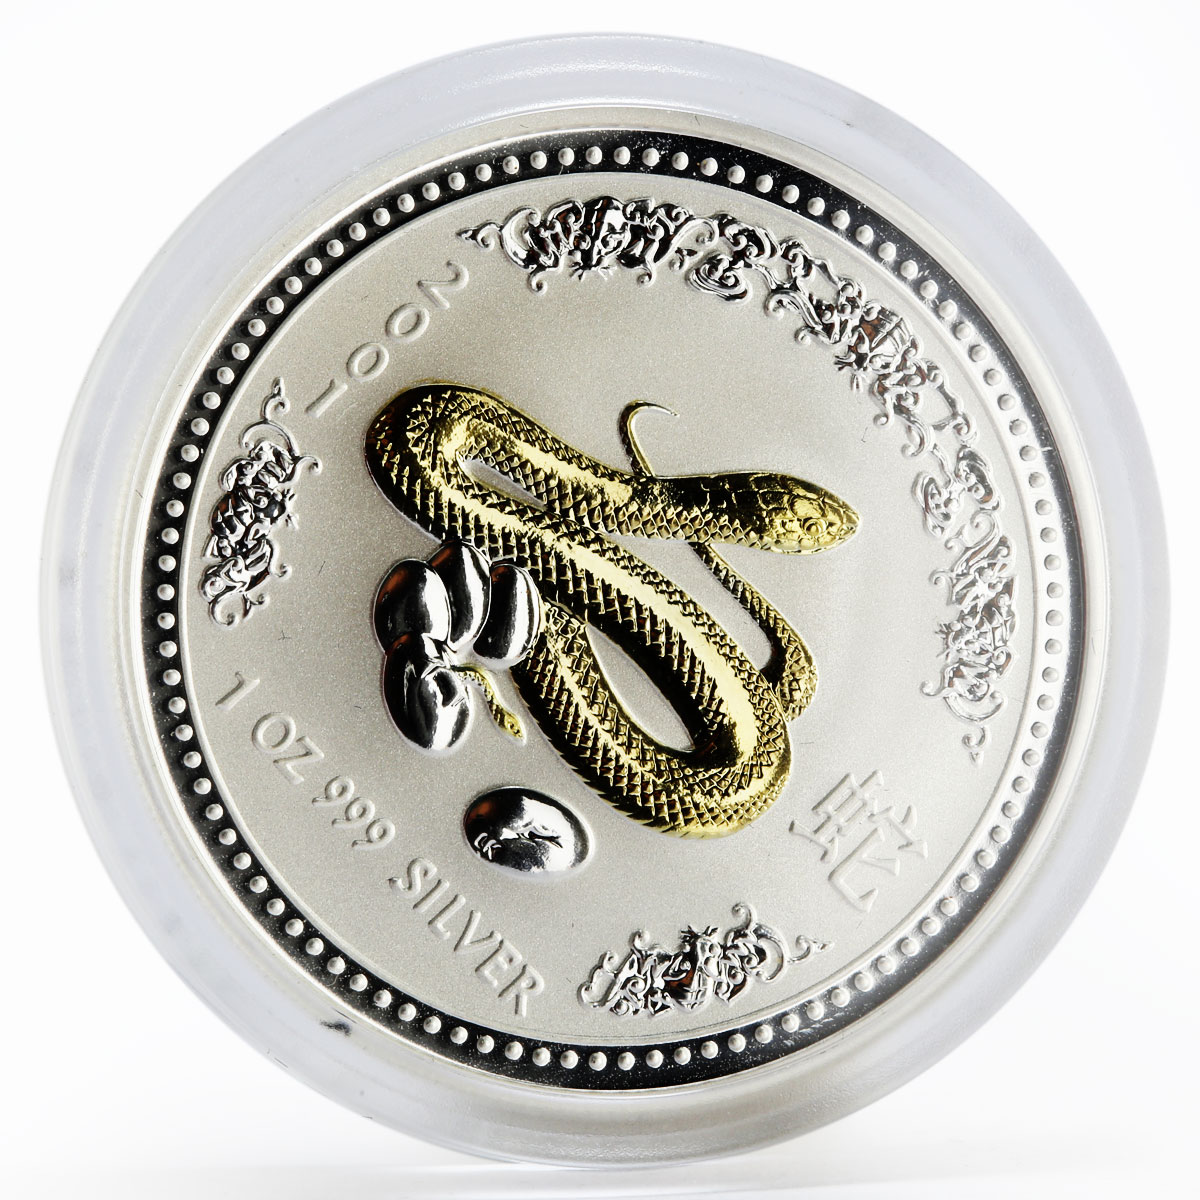 Australia 1 dollar Year of the Snake Lunar Series I gilded silver coin 2001